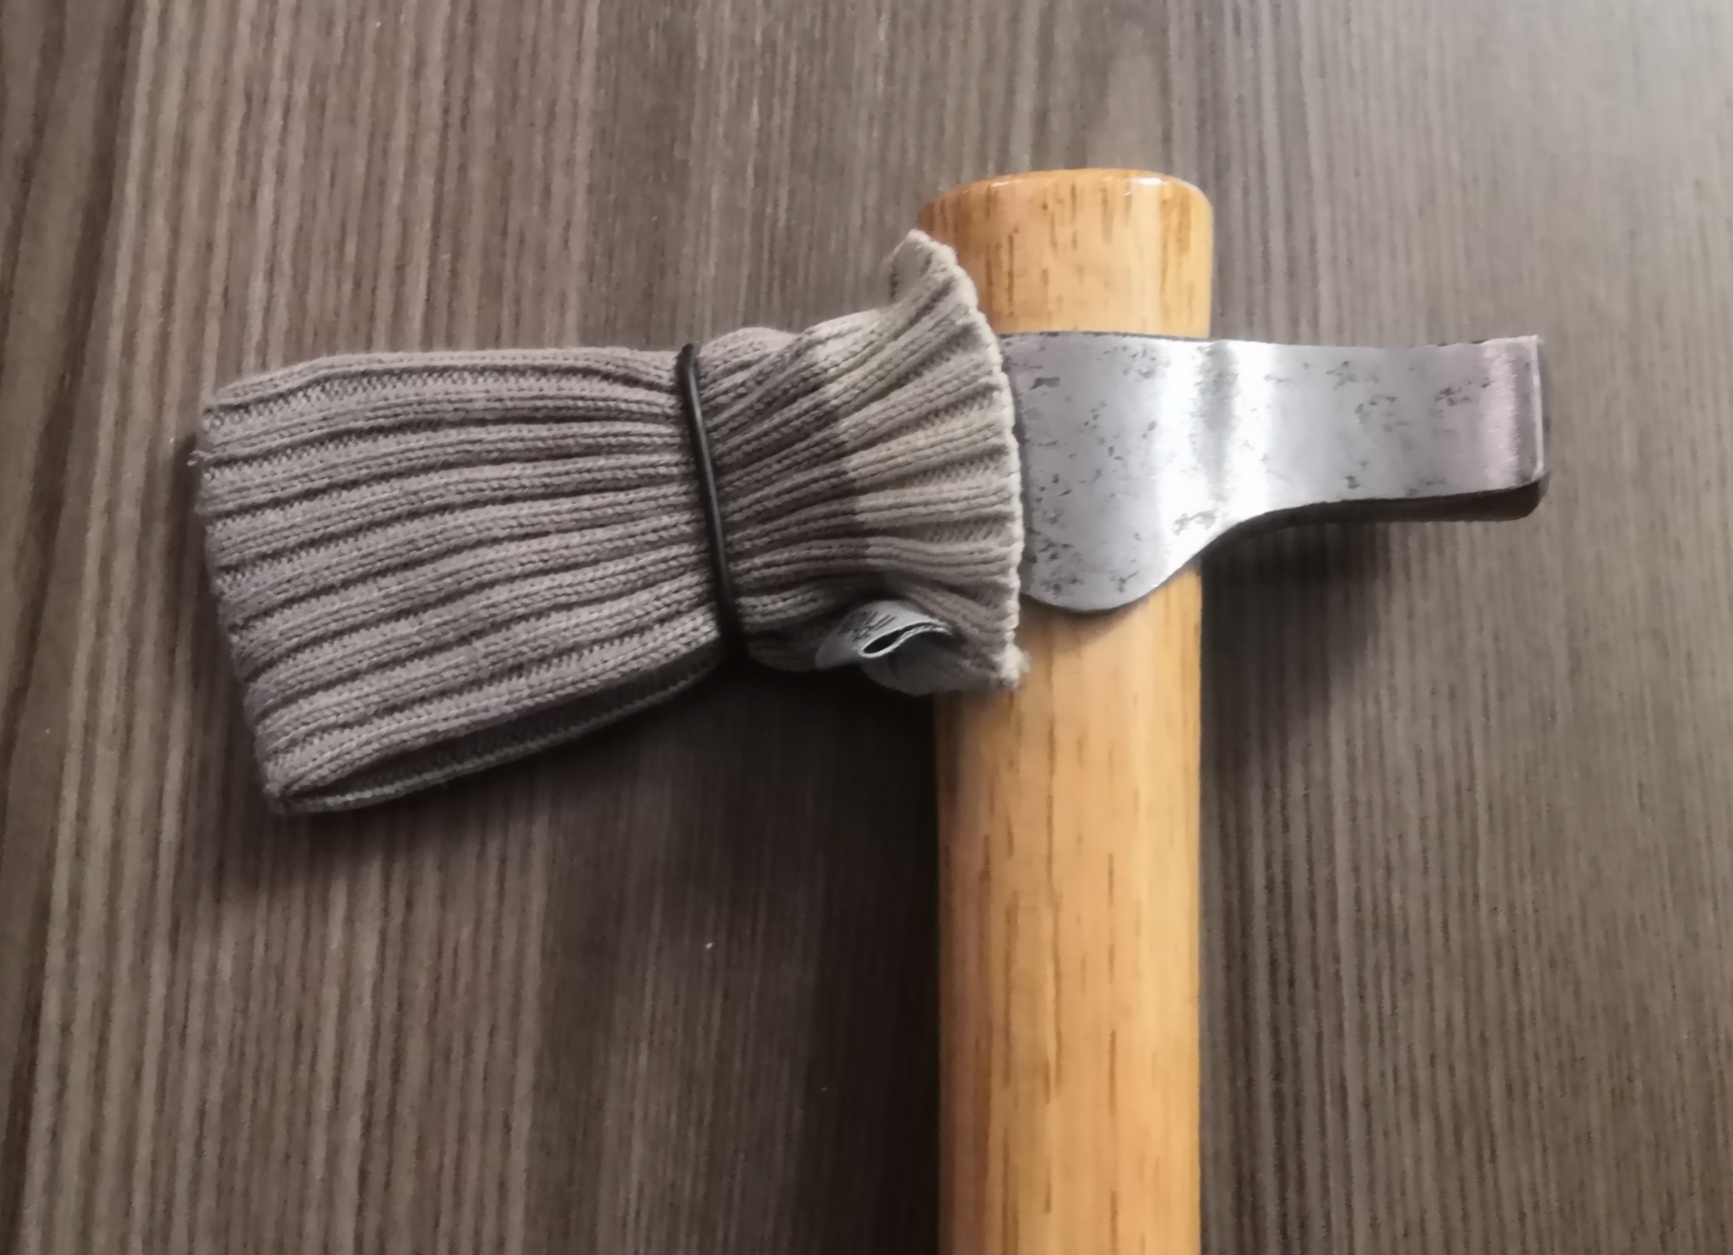 Reply to the post My ax tuning - My, Axe, Tuning, Etching, Wood carving, Celtic pattern, Викинги, Needlework without process, Longpost, Numbers, Cold Steel, Chisel, Tomahawk, Customization, Polishing, Sharpening, Bushcraft, Reply to post, Video, Youtube